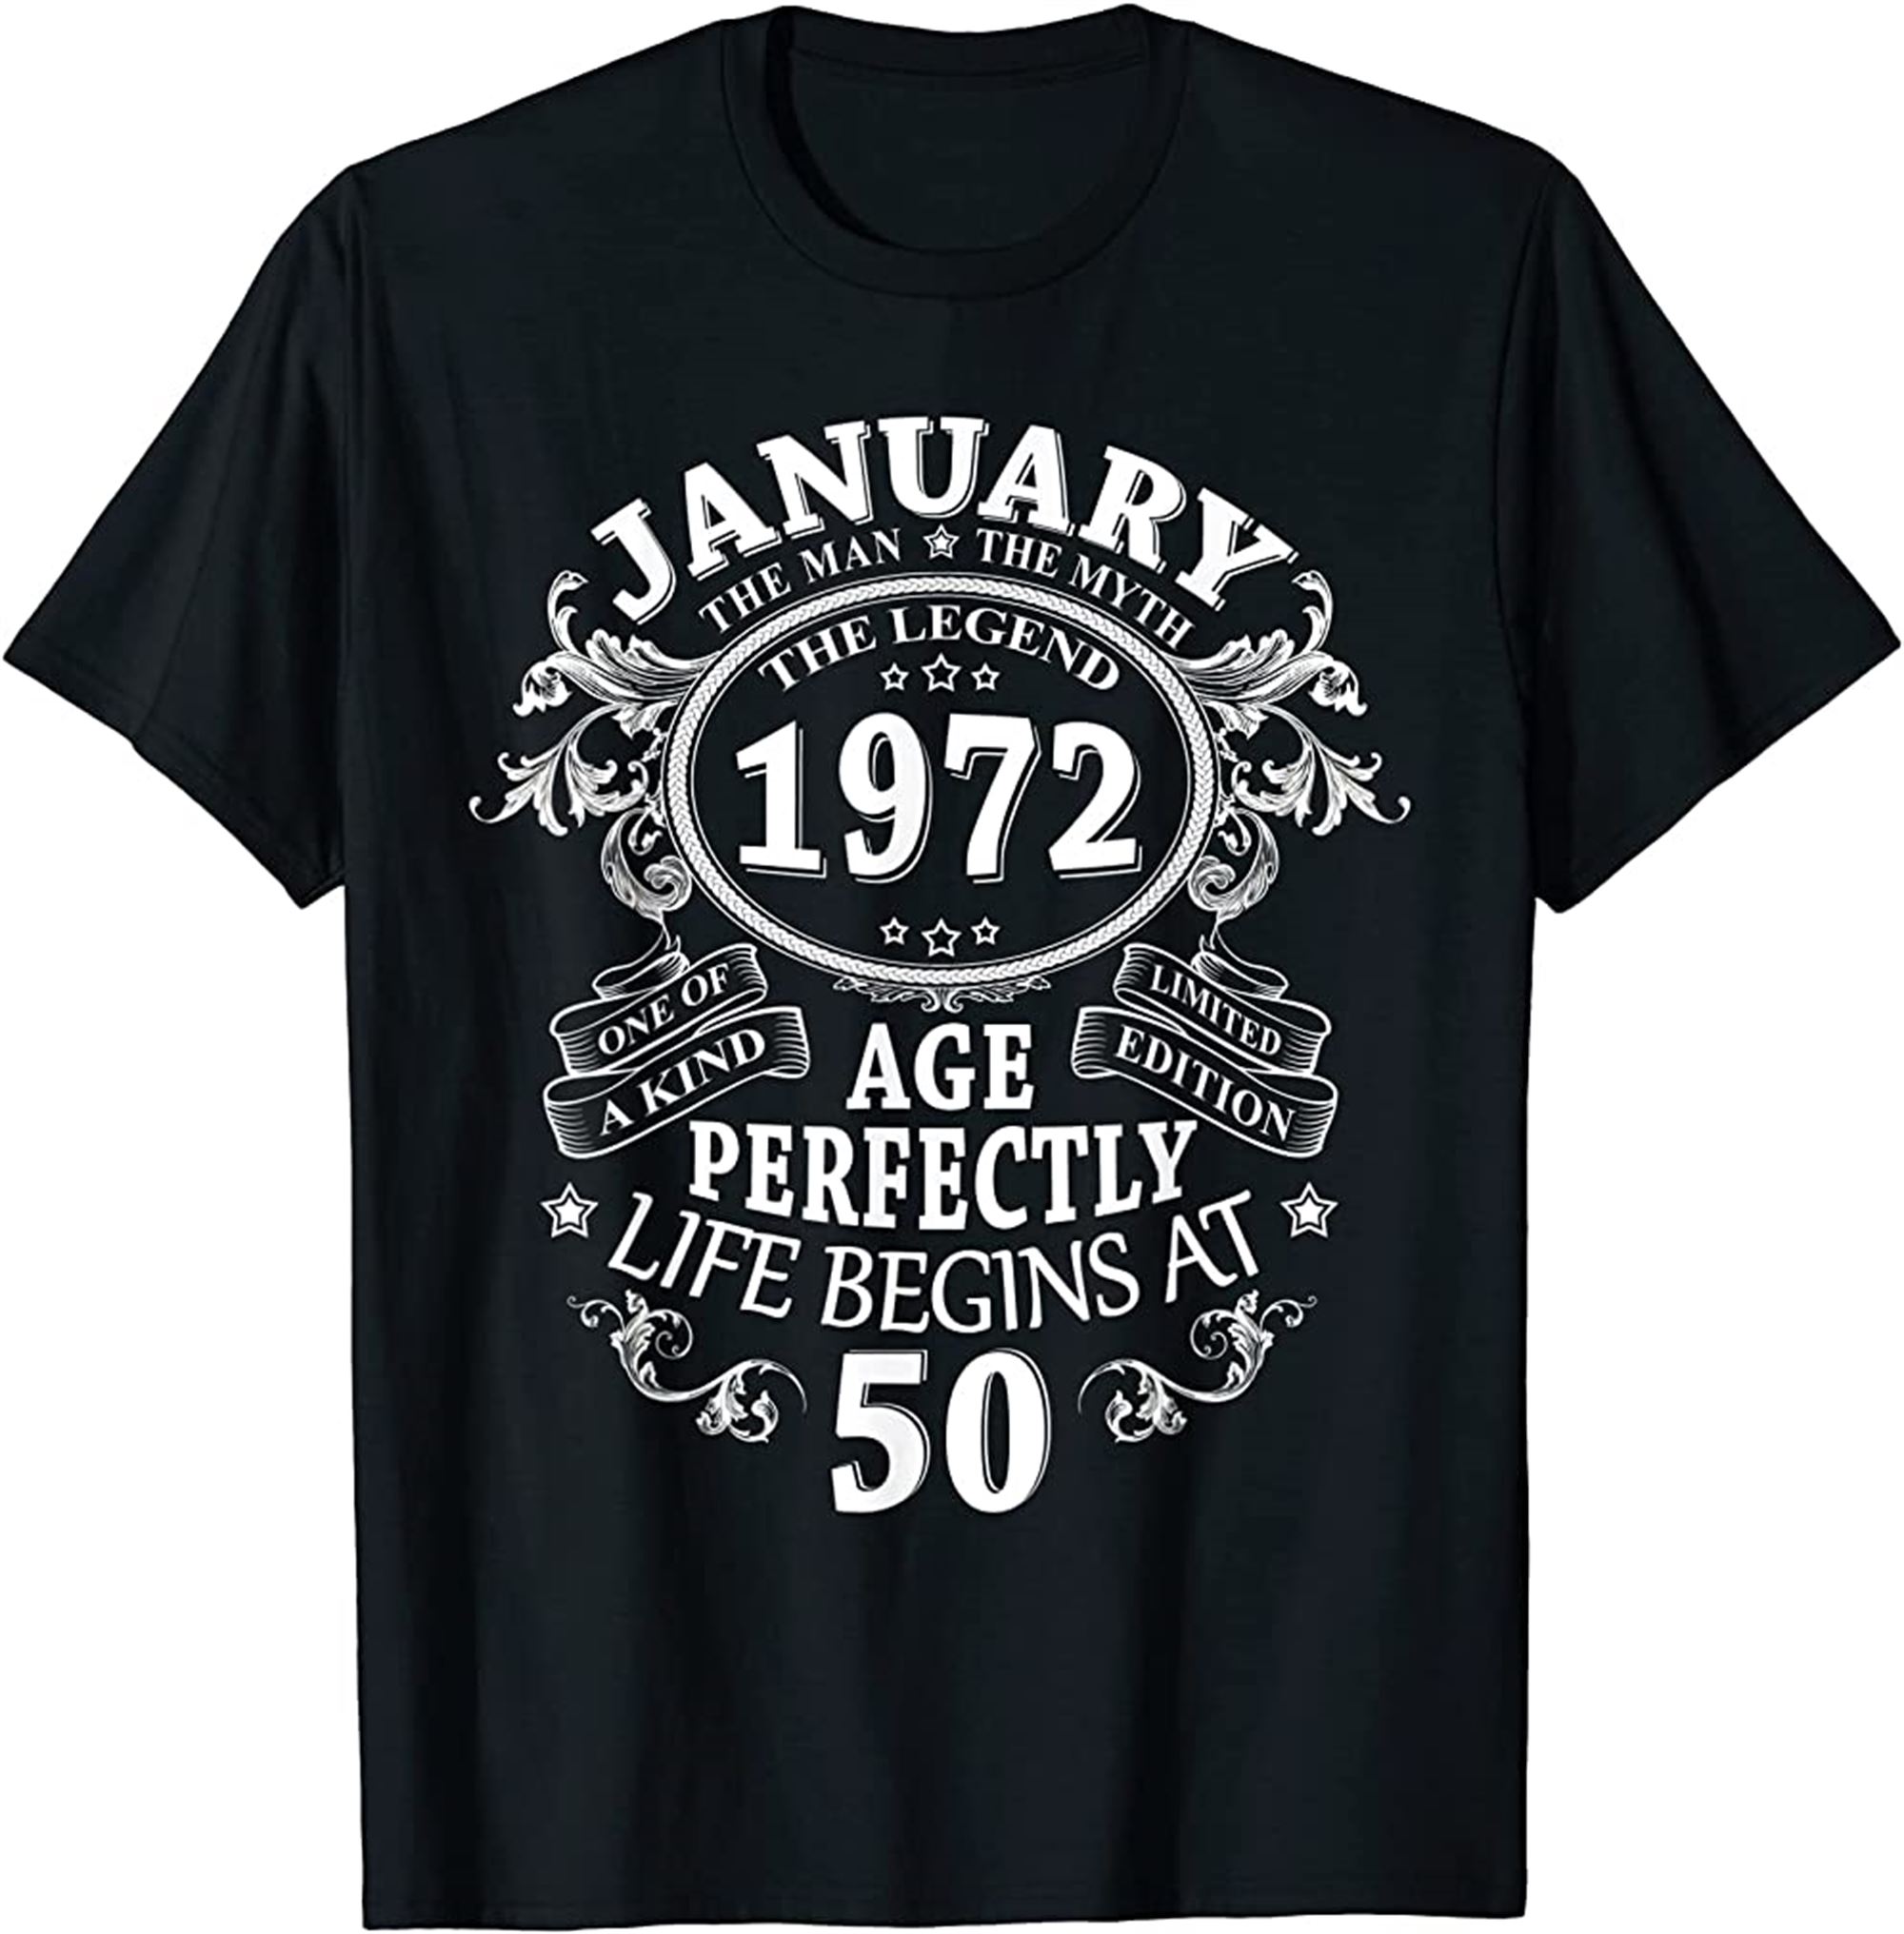 Mens January 1972 The Man Myth Legend 50 Year Old Birthday Gifts T-shirt Plus Size Up To 5xl